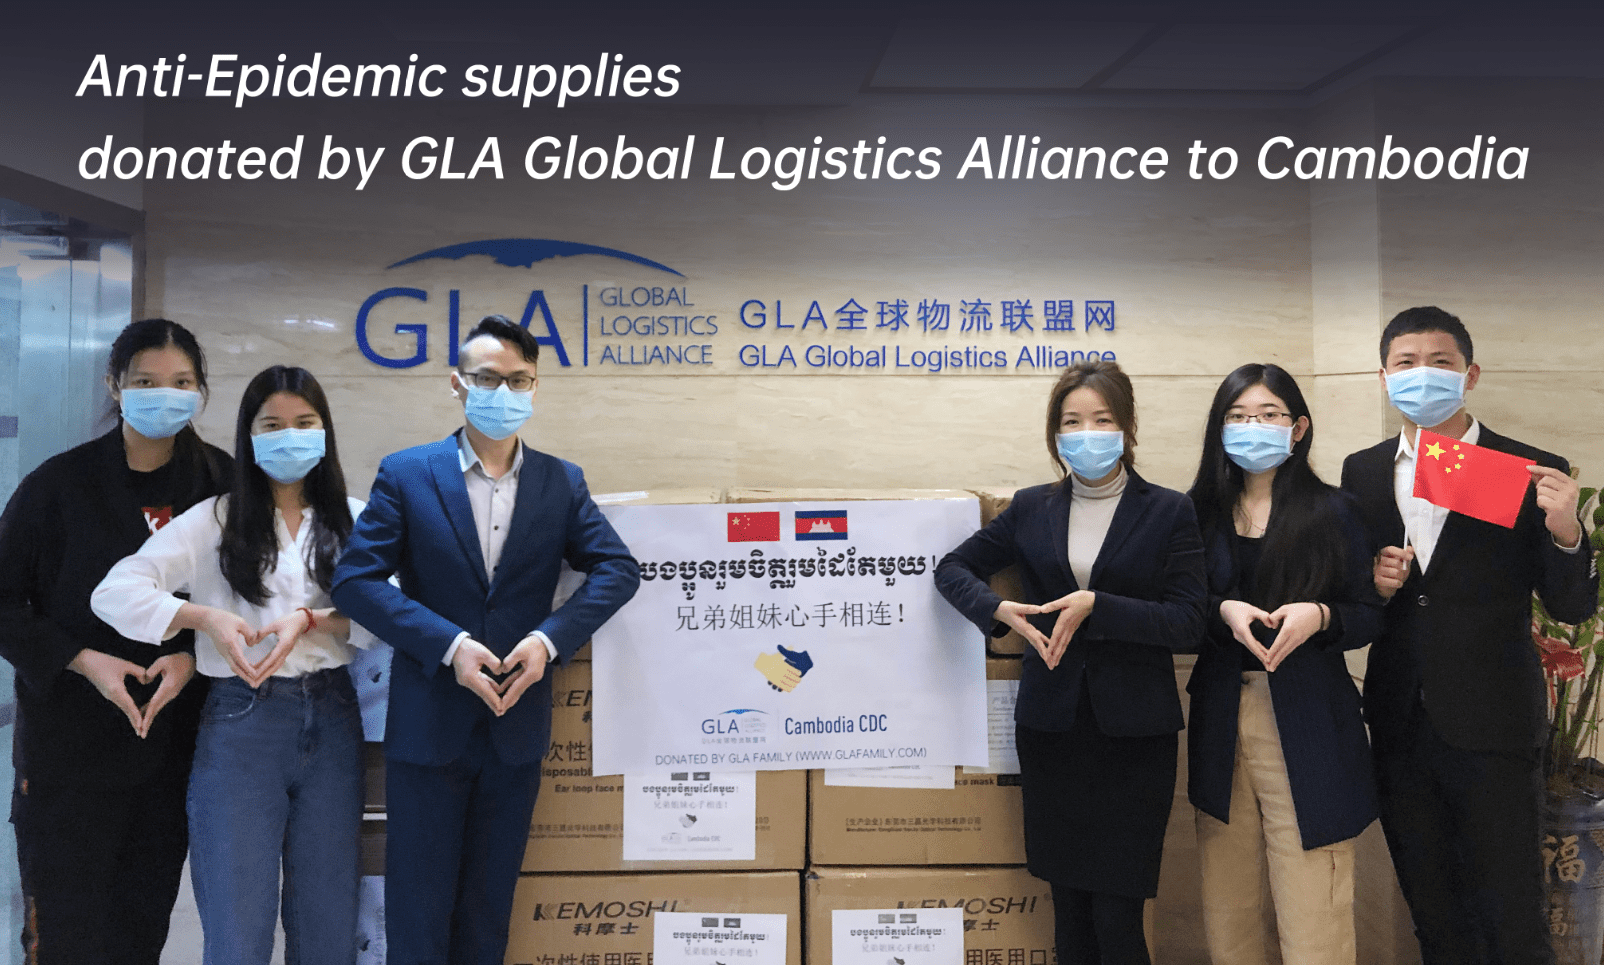 GLA NEWS | ANTI-EPIDEMIC SUPPLIES DONATED BY GLOBAL LOGISTICS ALLIANCE TO CAMBODIA